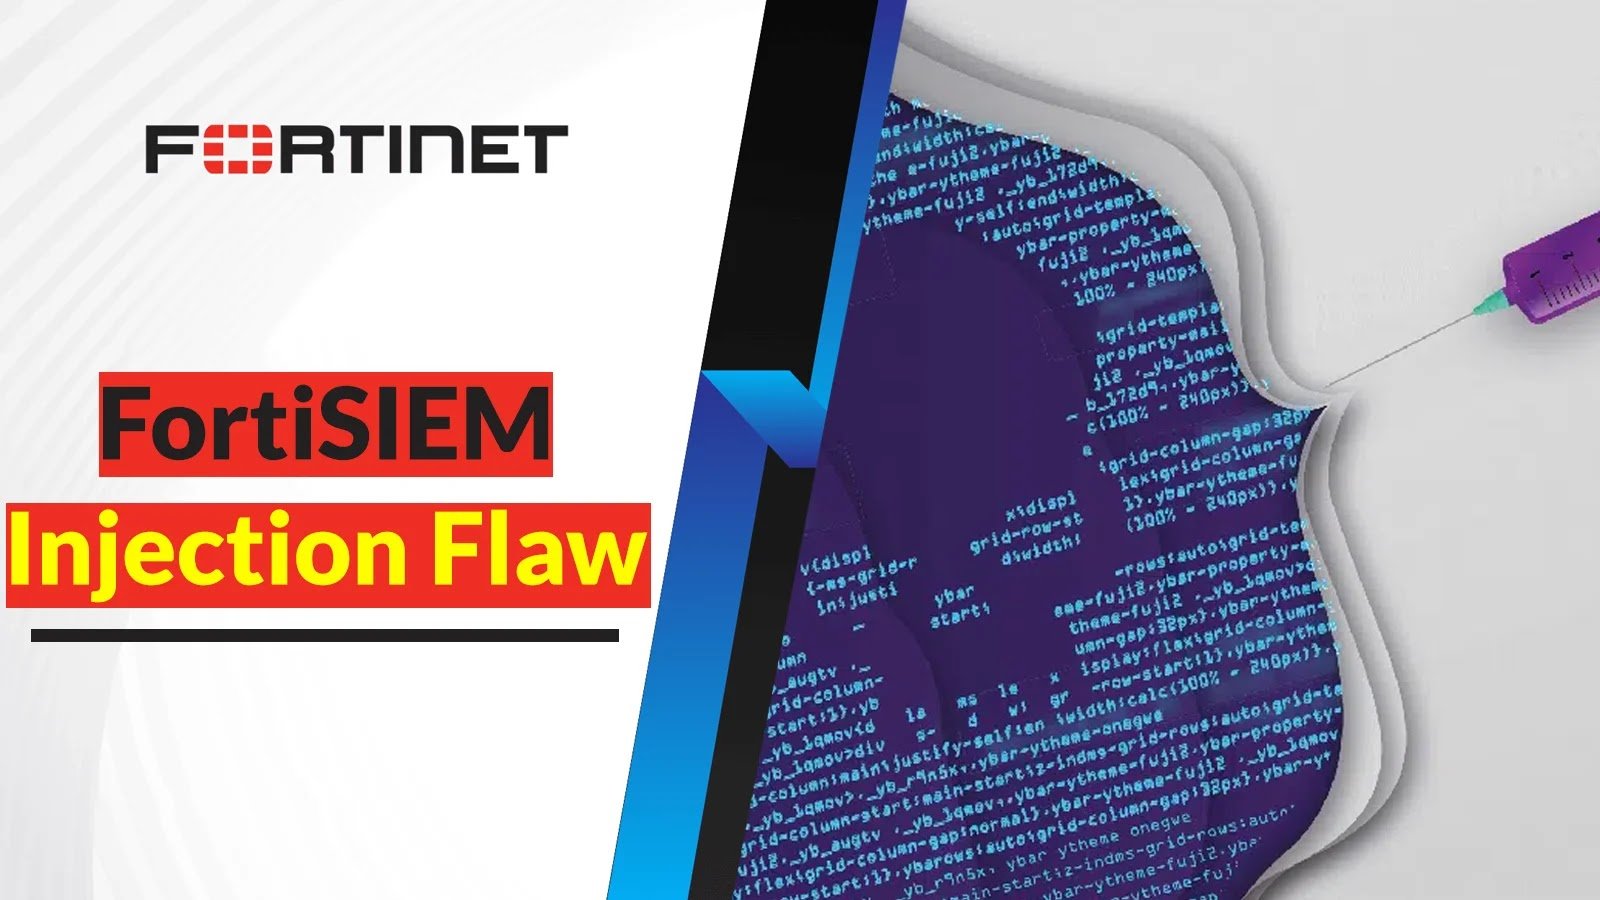 Forti SIEM Injection Flaw Let Attackers Execute Malicious Commands.